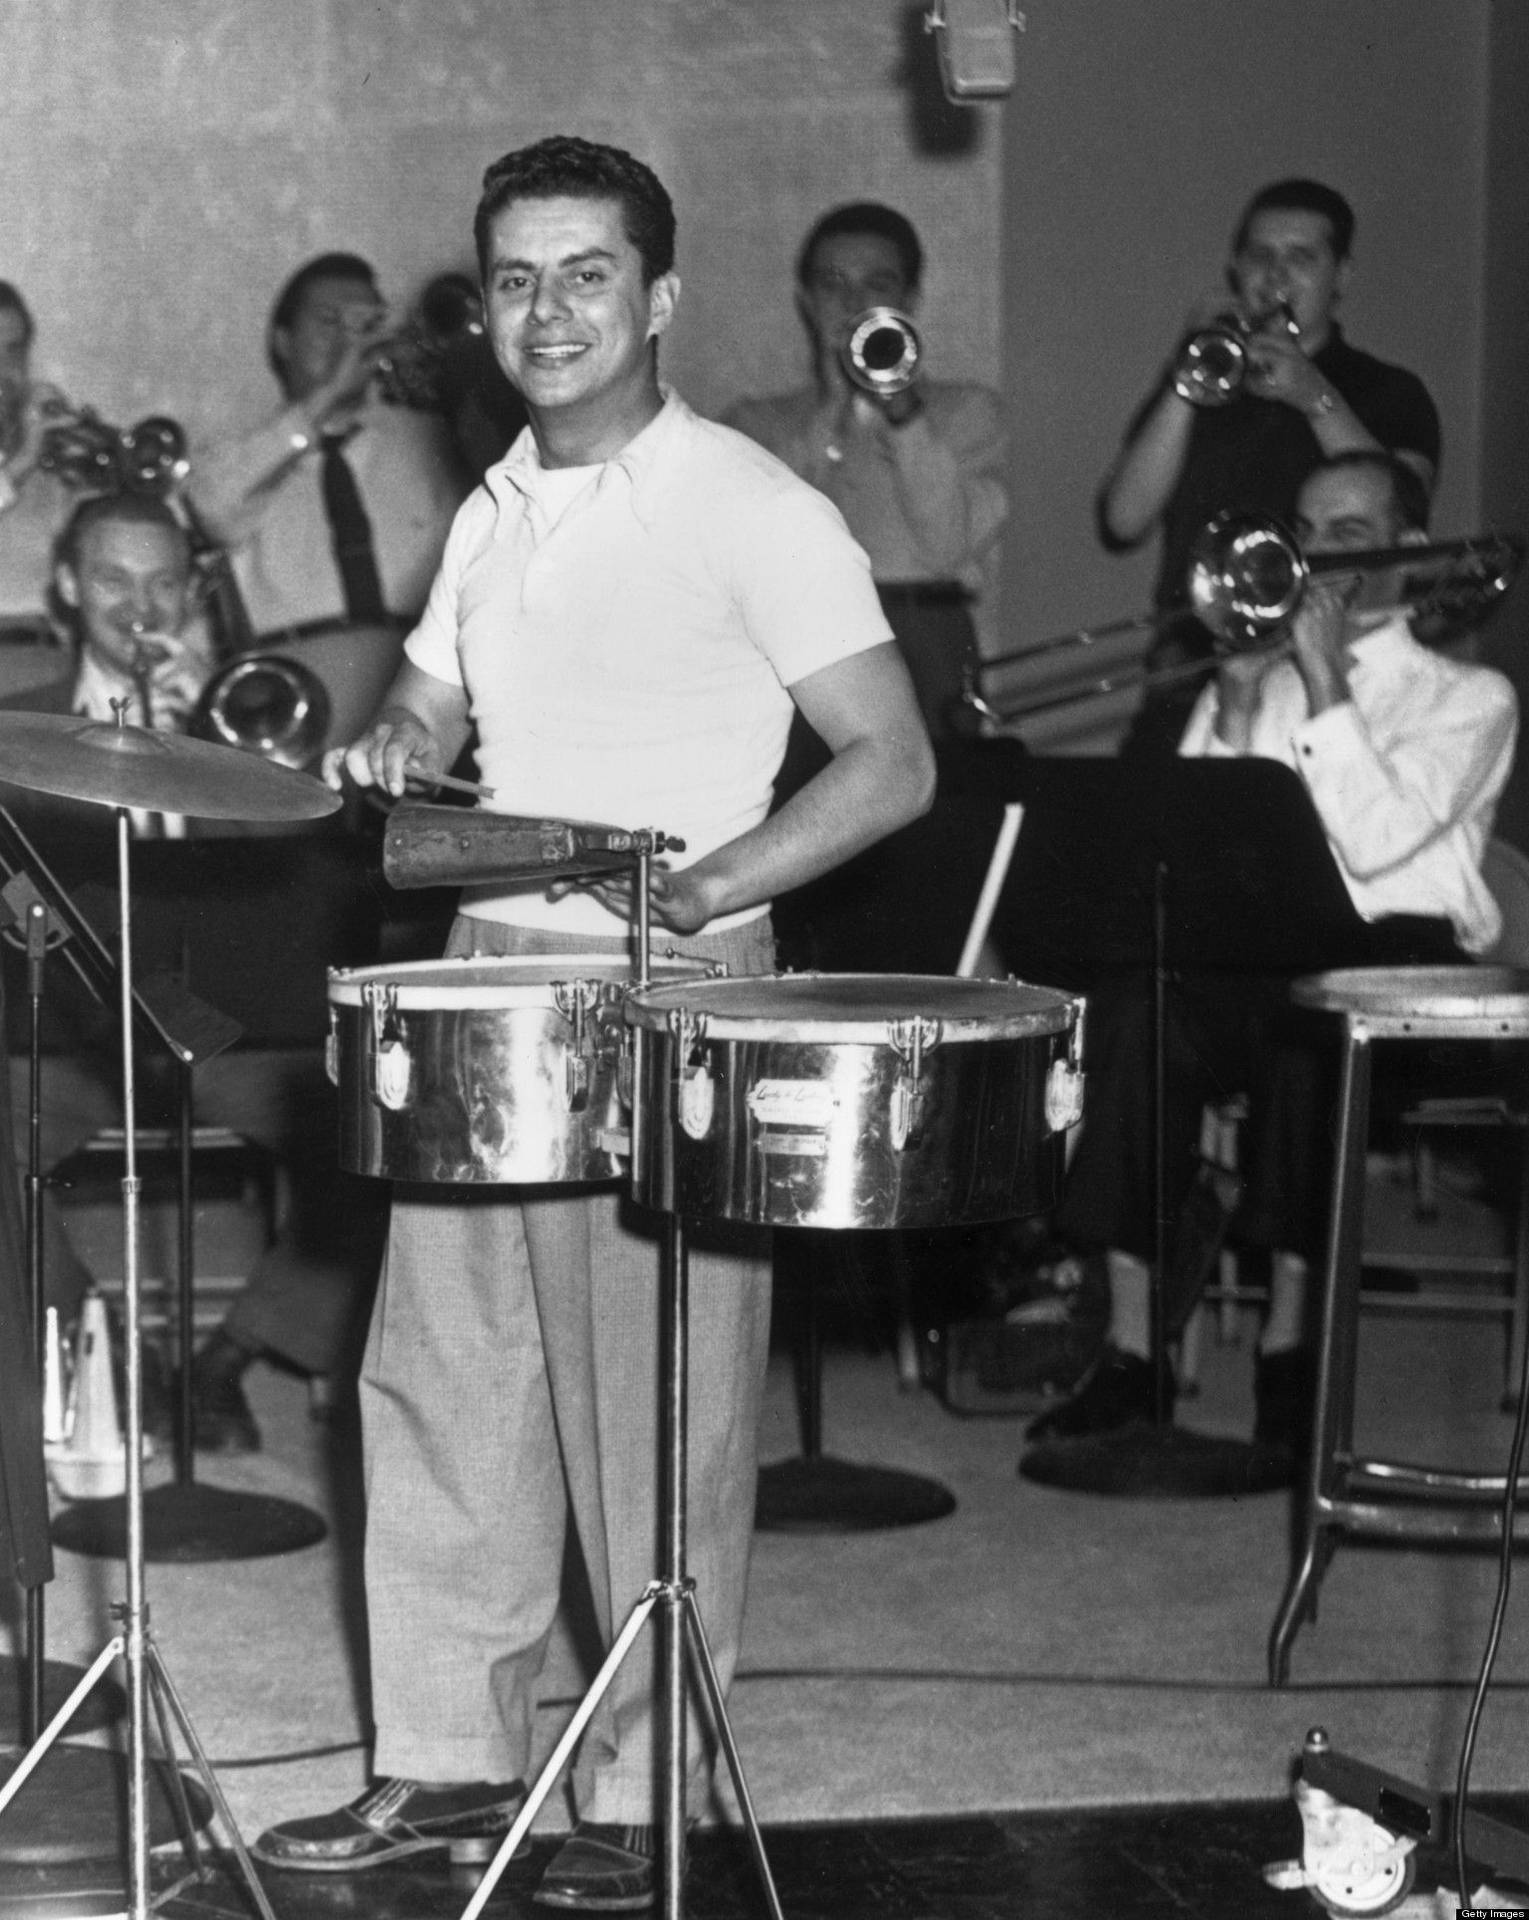 Tito Puente leading his vibrant band in a live performance. Wallpaper